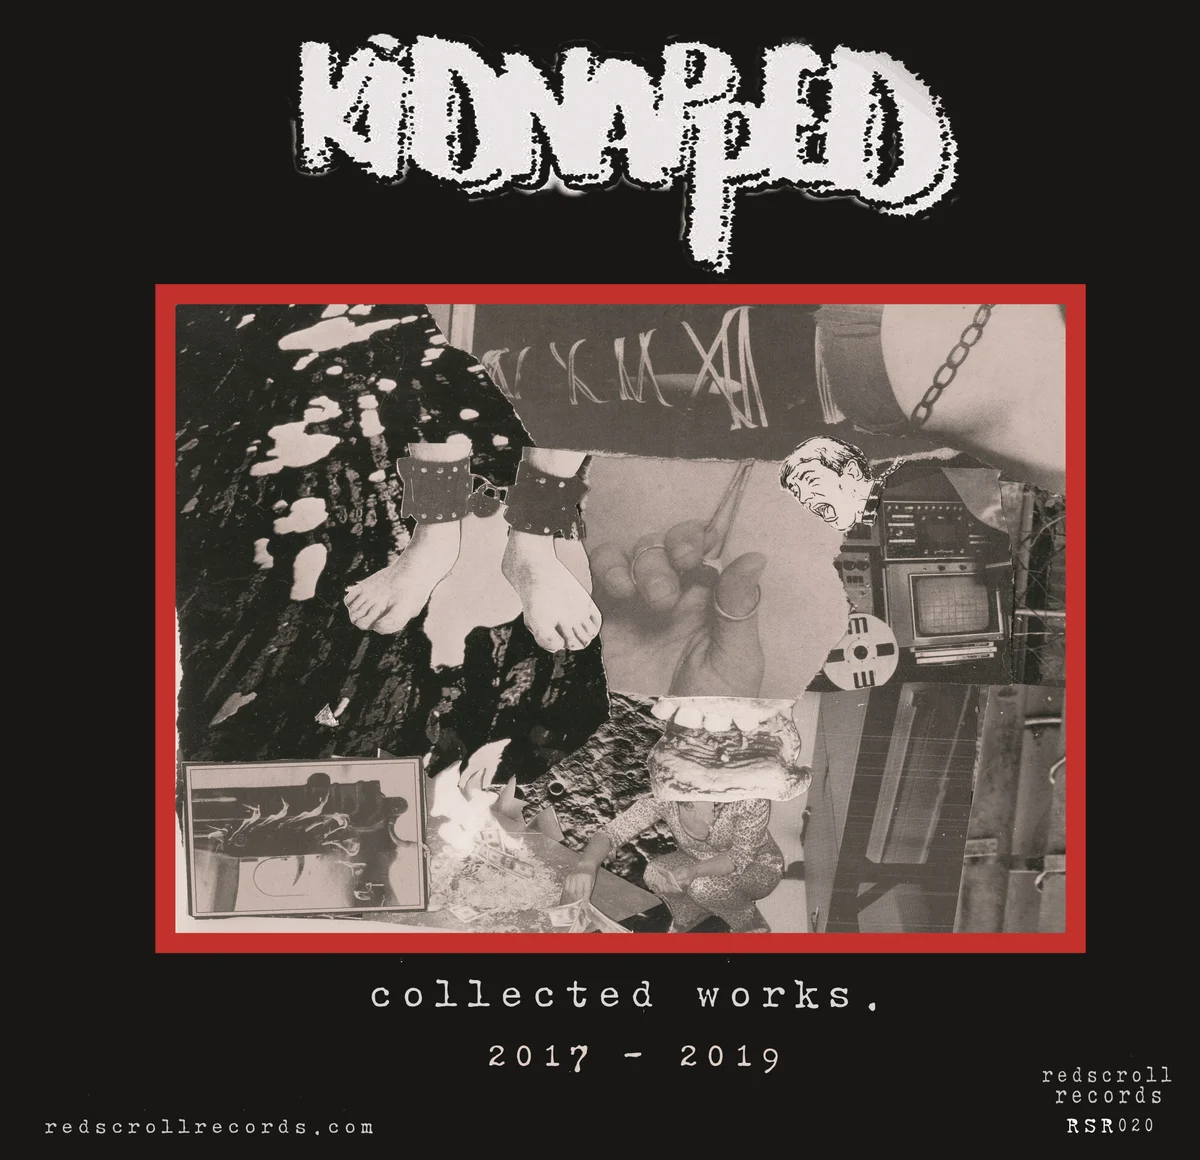 Kidnapped - Collected Works 2017-2019 LP